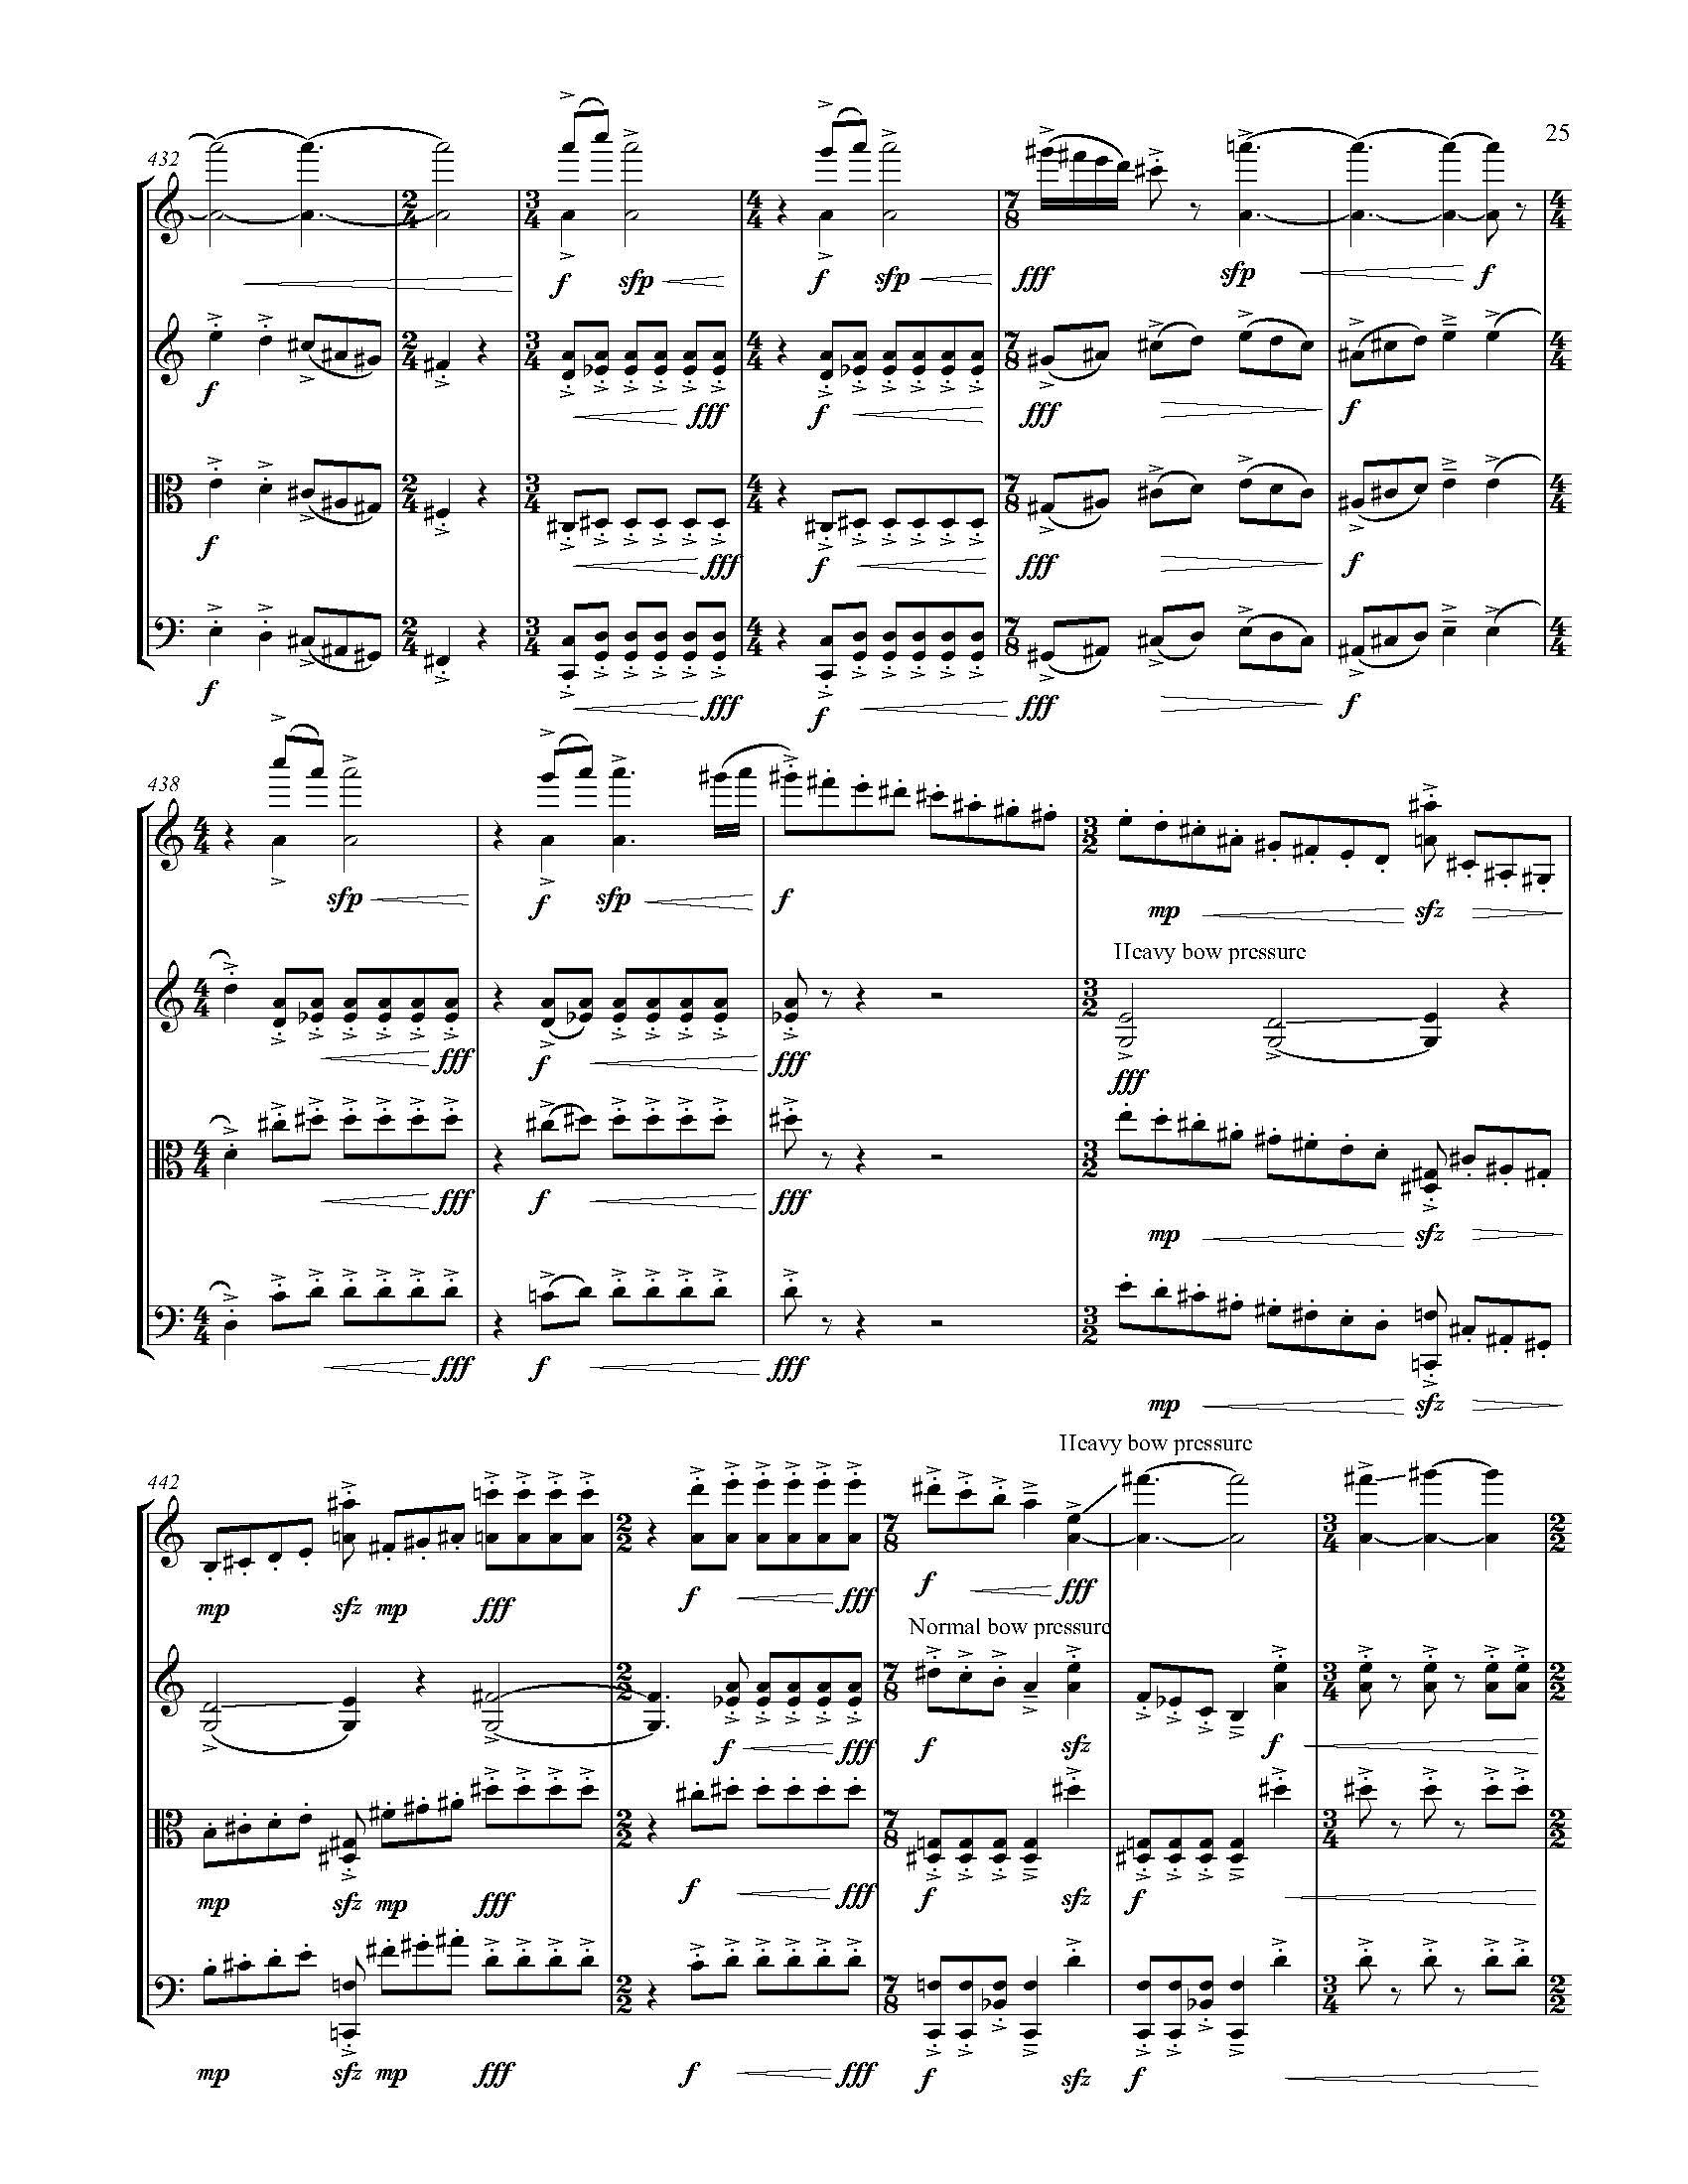 A Country of Vast Designs - Complete Score_Page_31.jpg